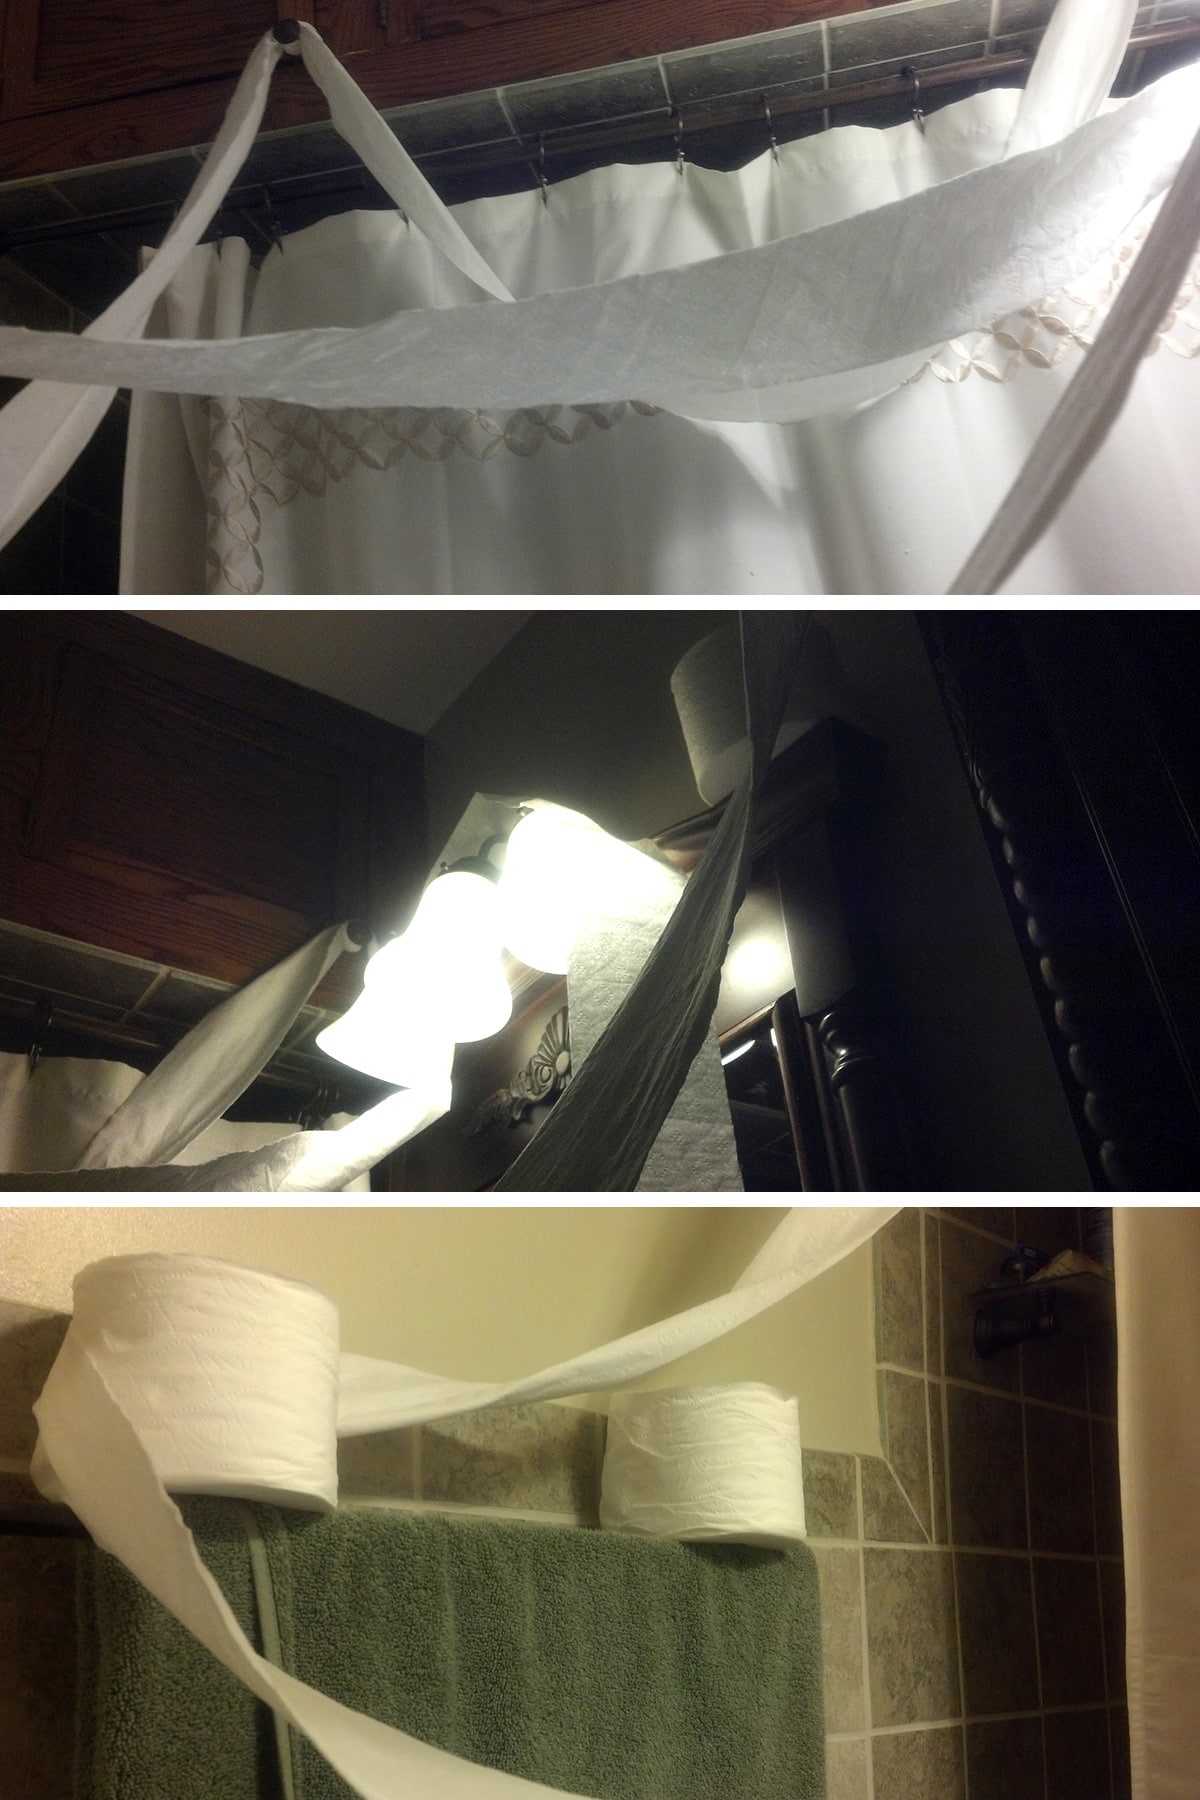 A compilarion image of 3 shots of toilet paper draped around the washroom.